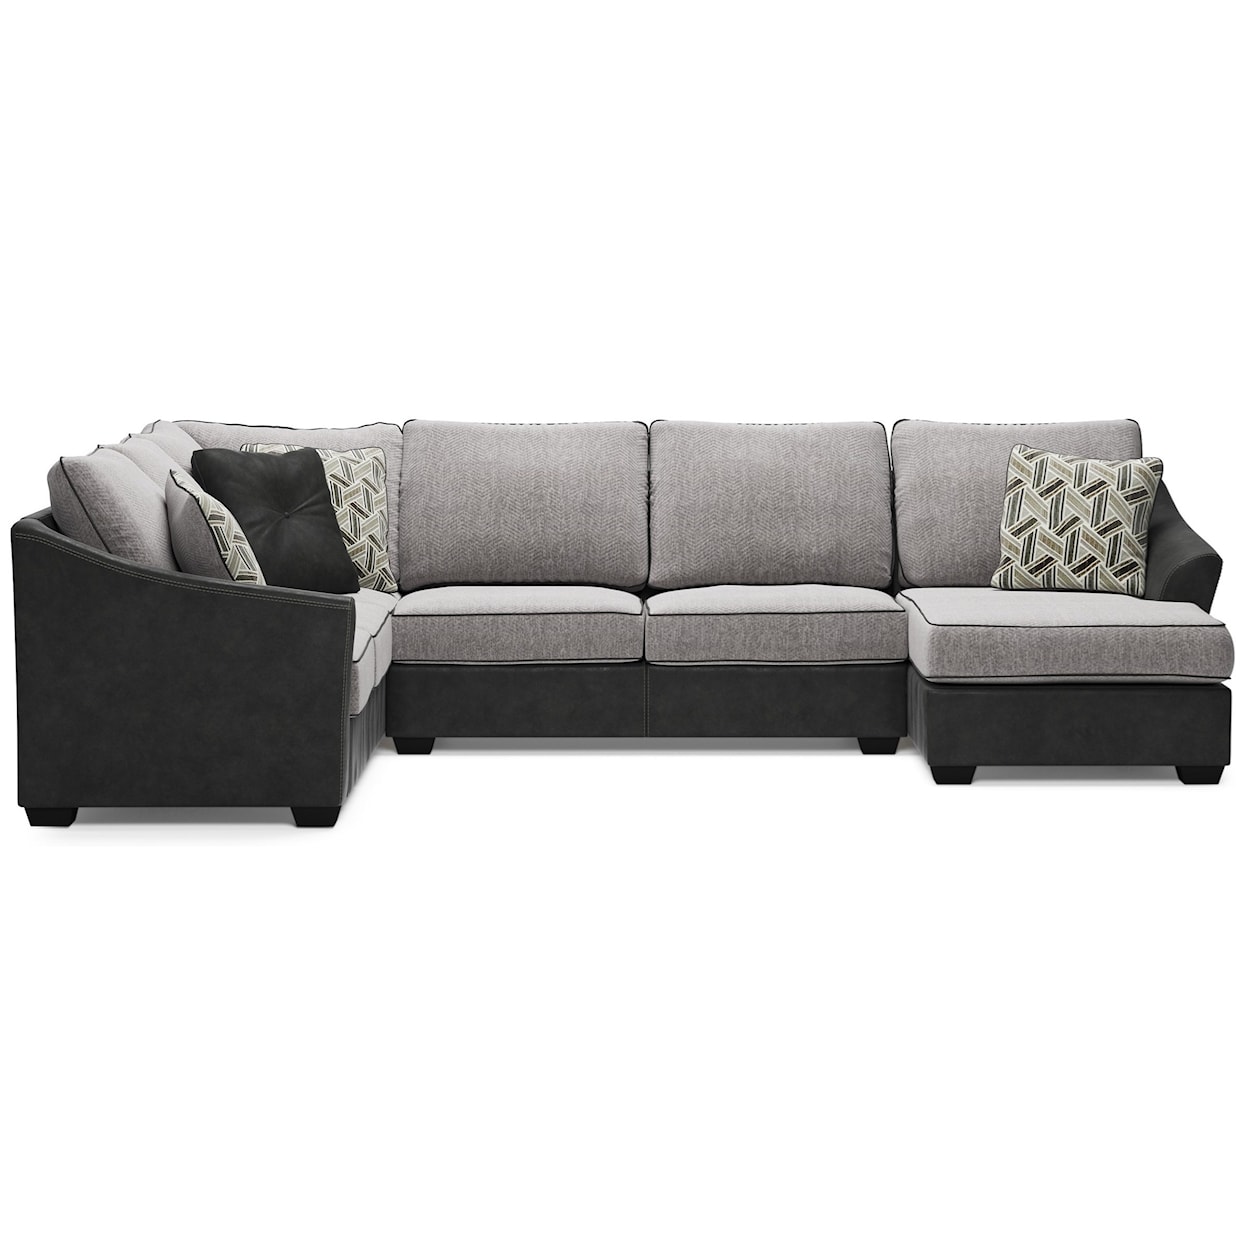 Ashley Furniture Signature Design Bilgray Sectional with Right Chaise